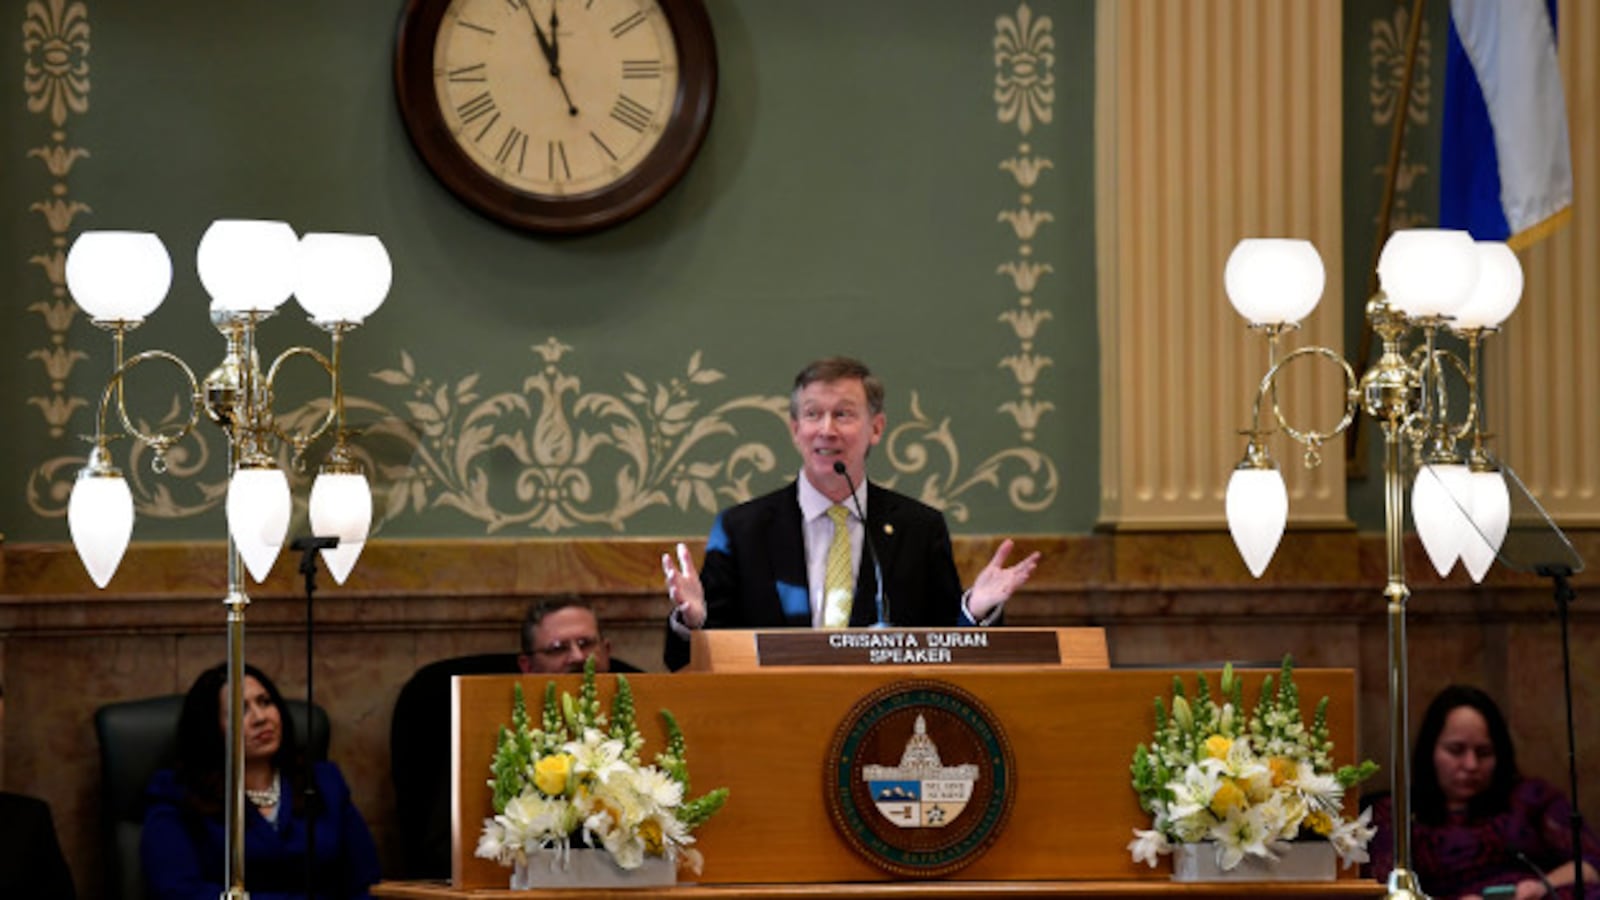 Gov. John Hickenlooper delivers the Colorado State of the State address in January 2018.